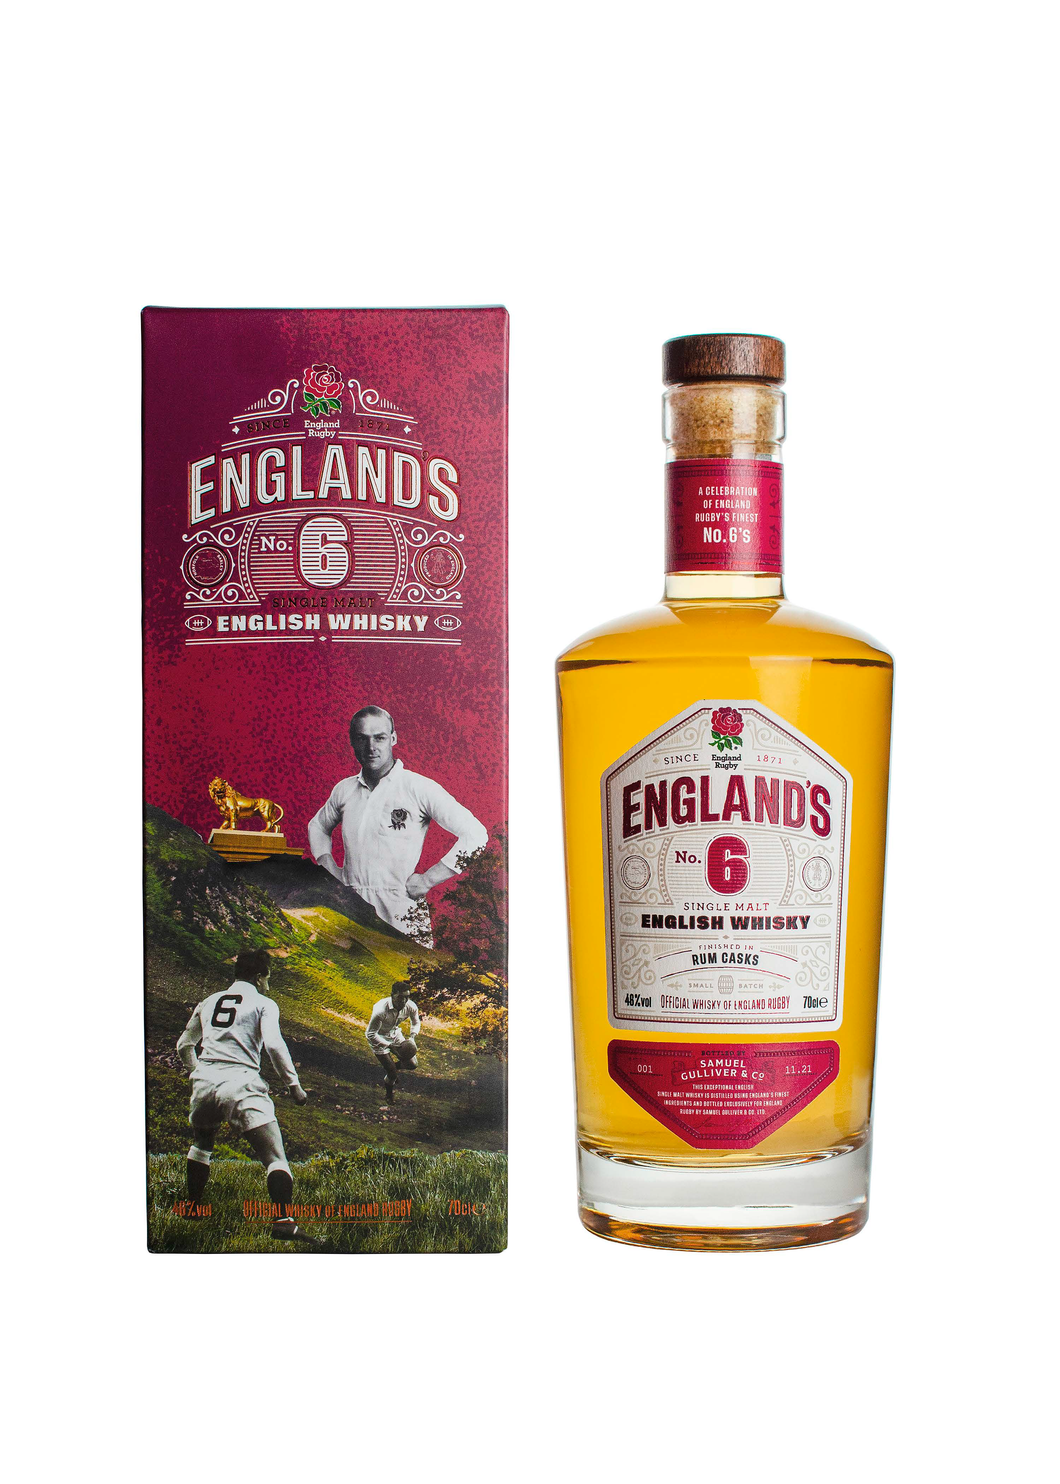 England's No.6 Rum Cask Single Malt English Whisky - The Official Whisky of England Rugby. 700ml Bottle & Presentation Box